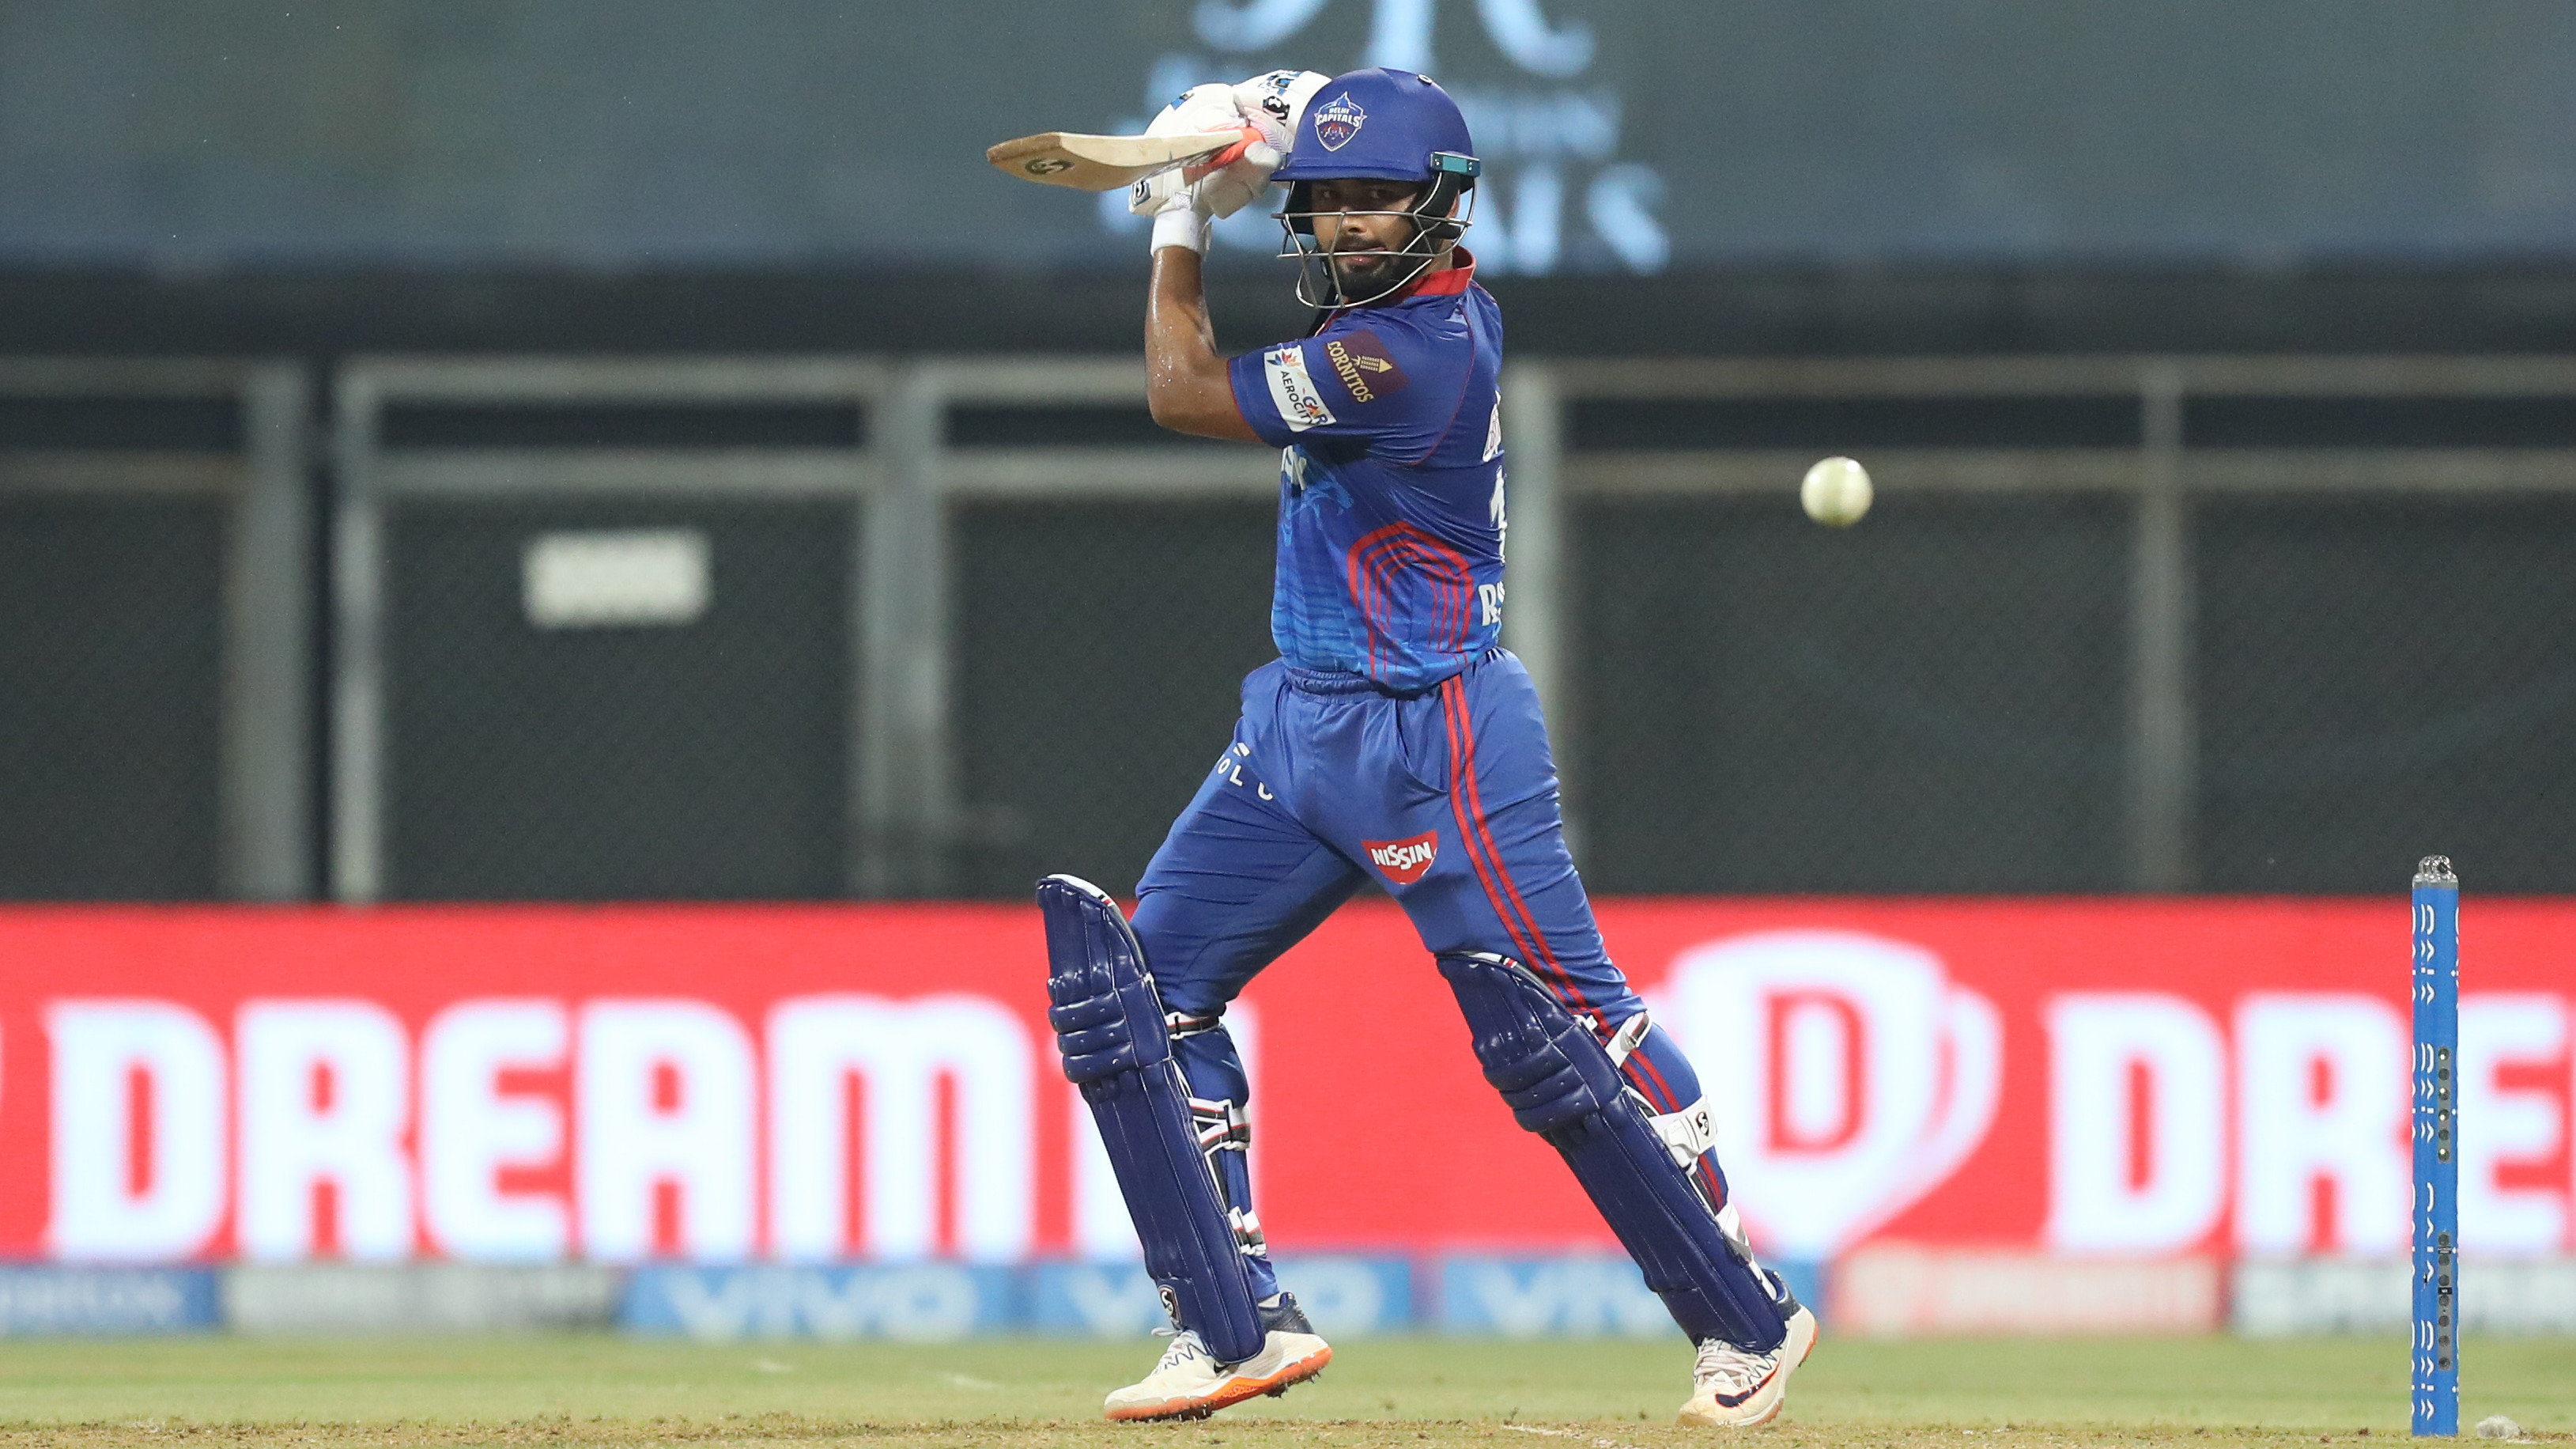 IPL 2021: “Dew played a big role, we were 15-20 runs short”, says Rishabh Pant after DC’s loss to RR